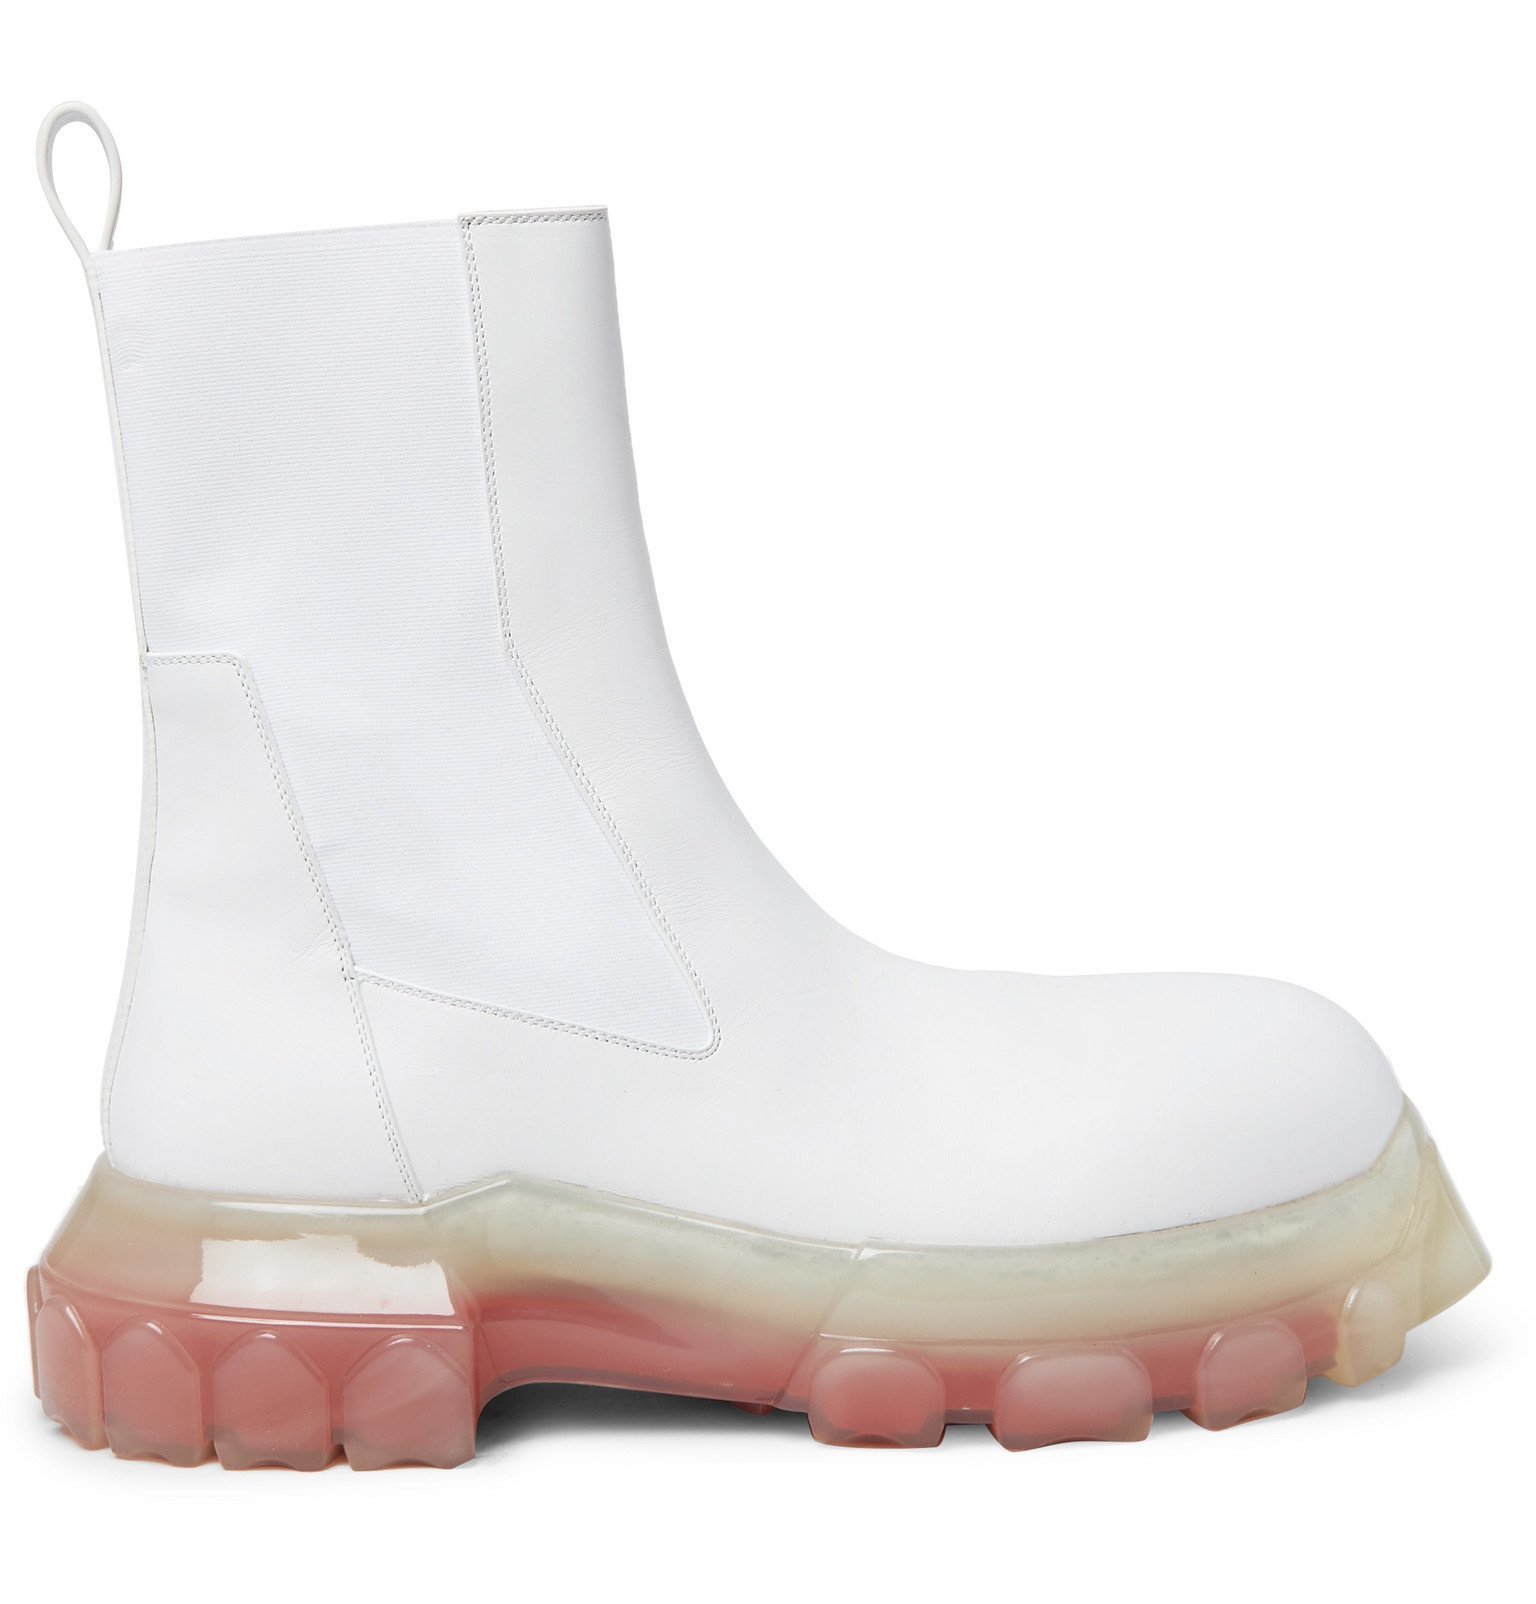 Rick Owens - Mega Bozo Tractor Beetle Leather Boots - White Rick Owens